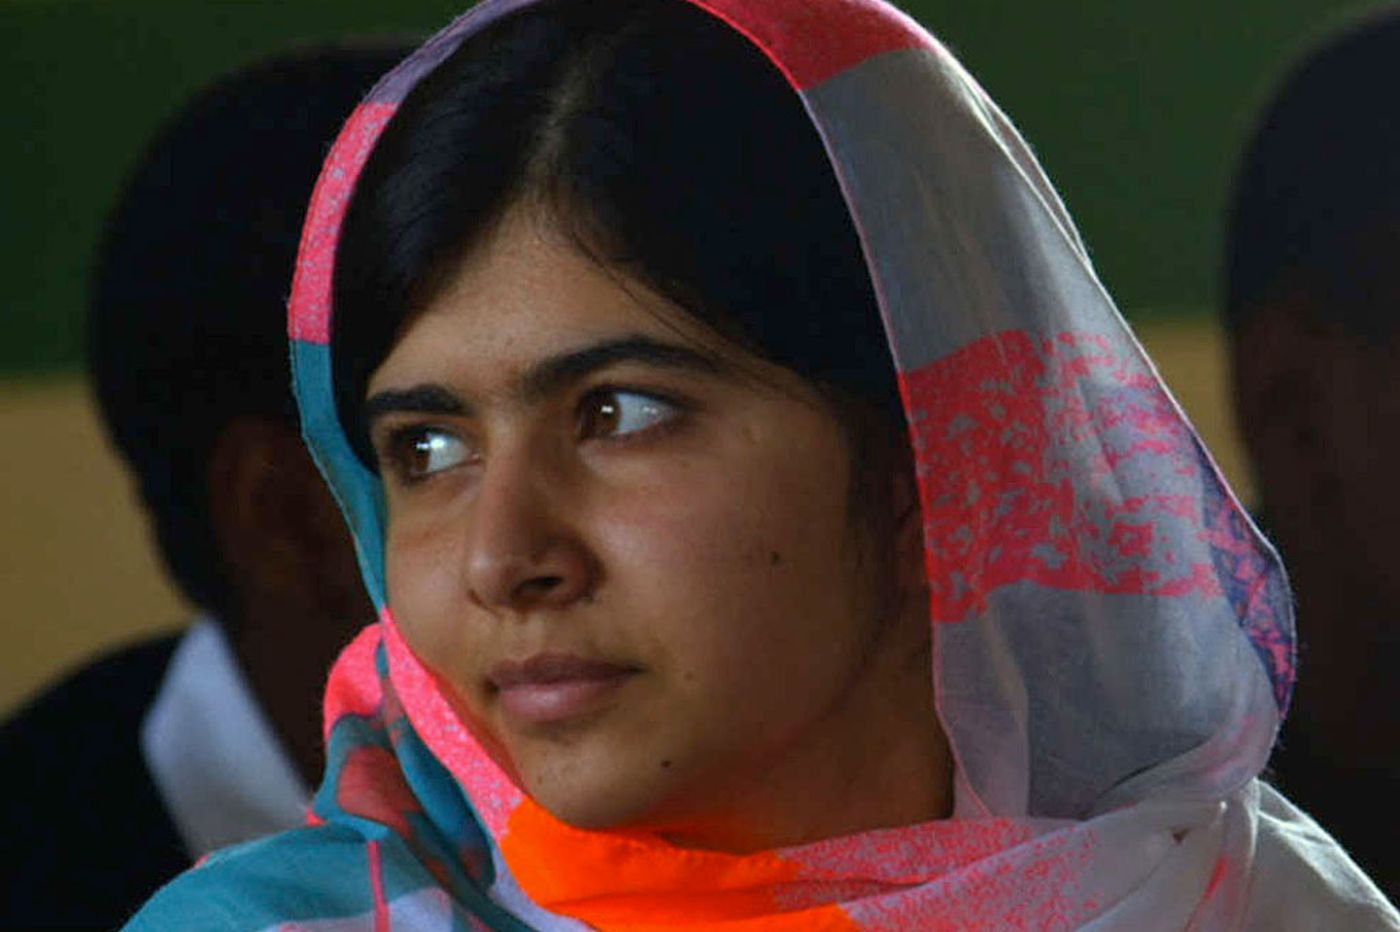 Deferential documentary of young heroine Malala Yousafzai